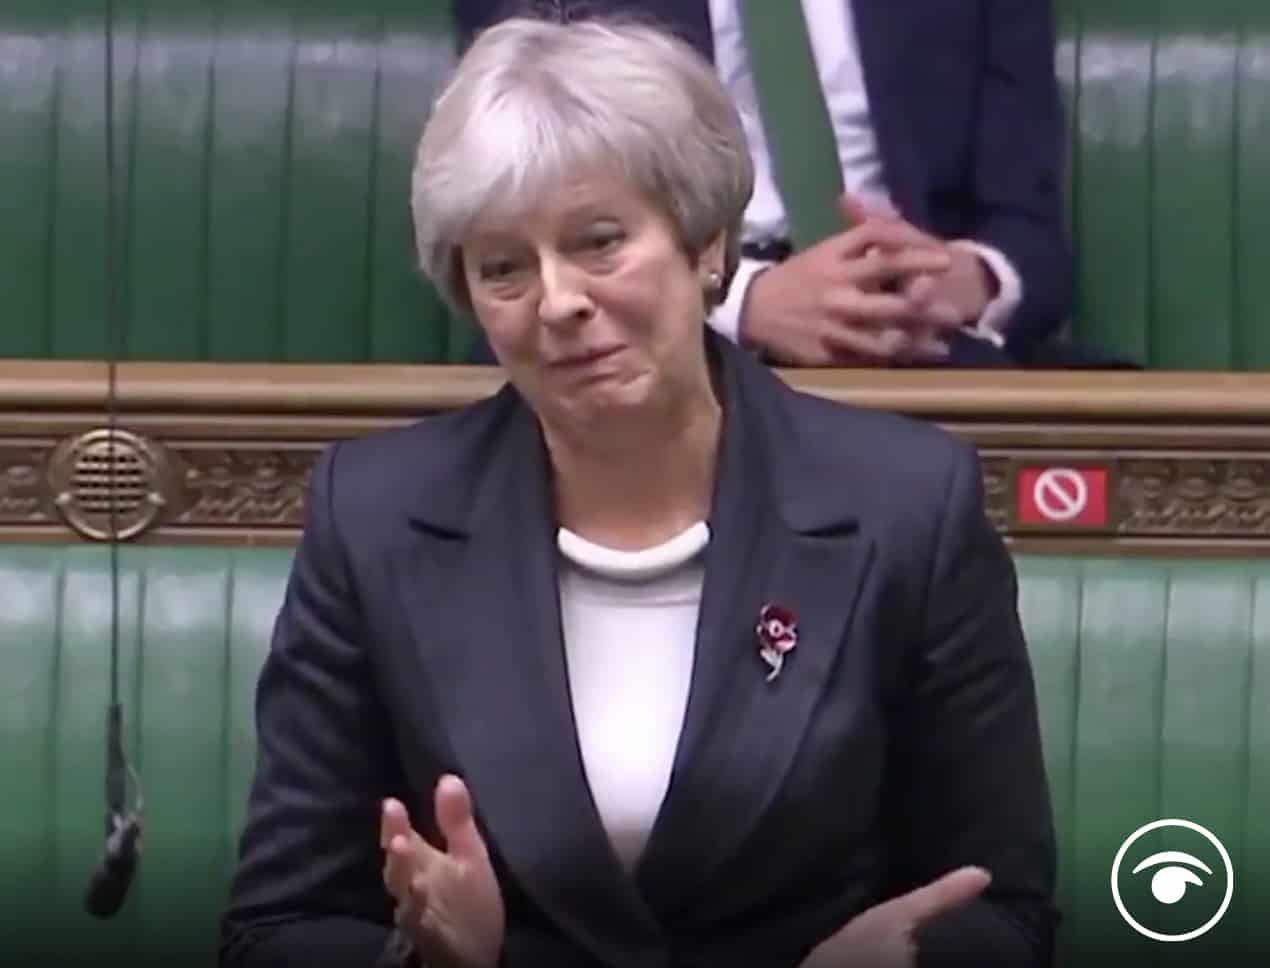 Watch: Theresa May questions legality and ethics of plan to send migrants to Rwanda